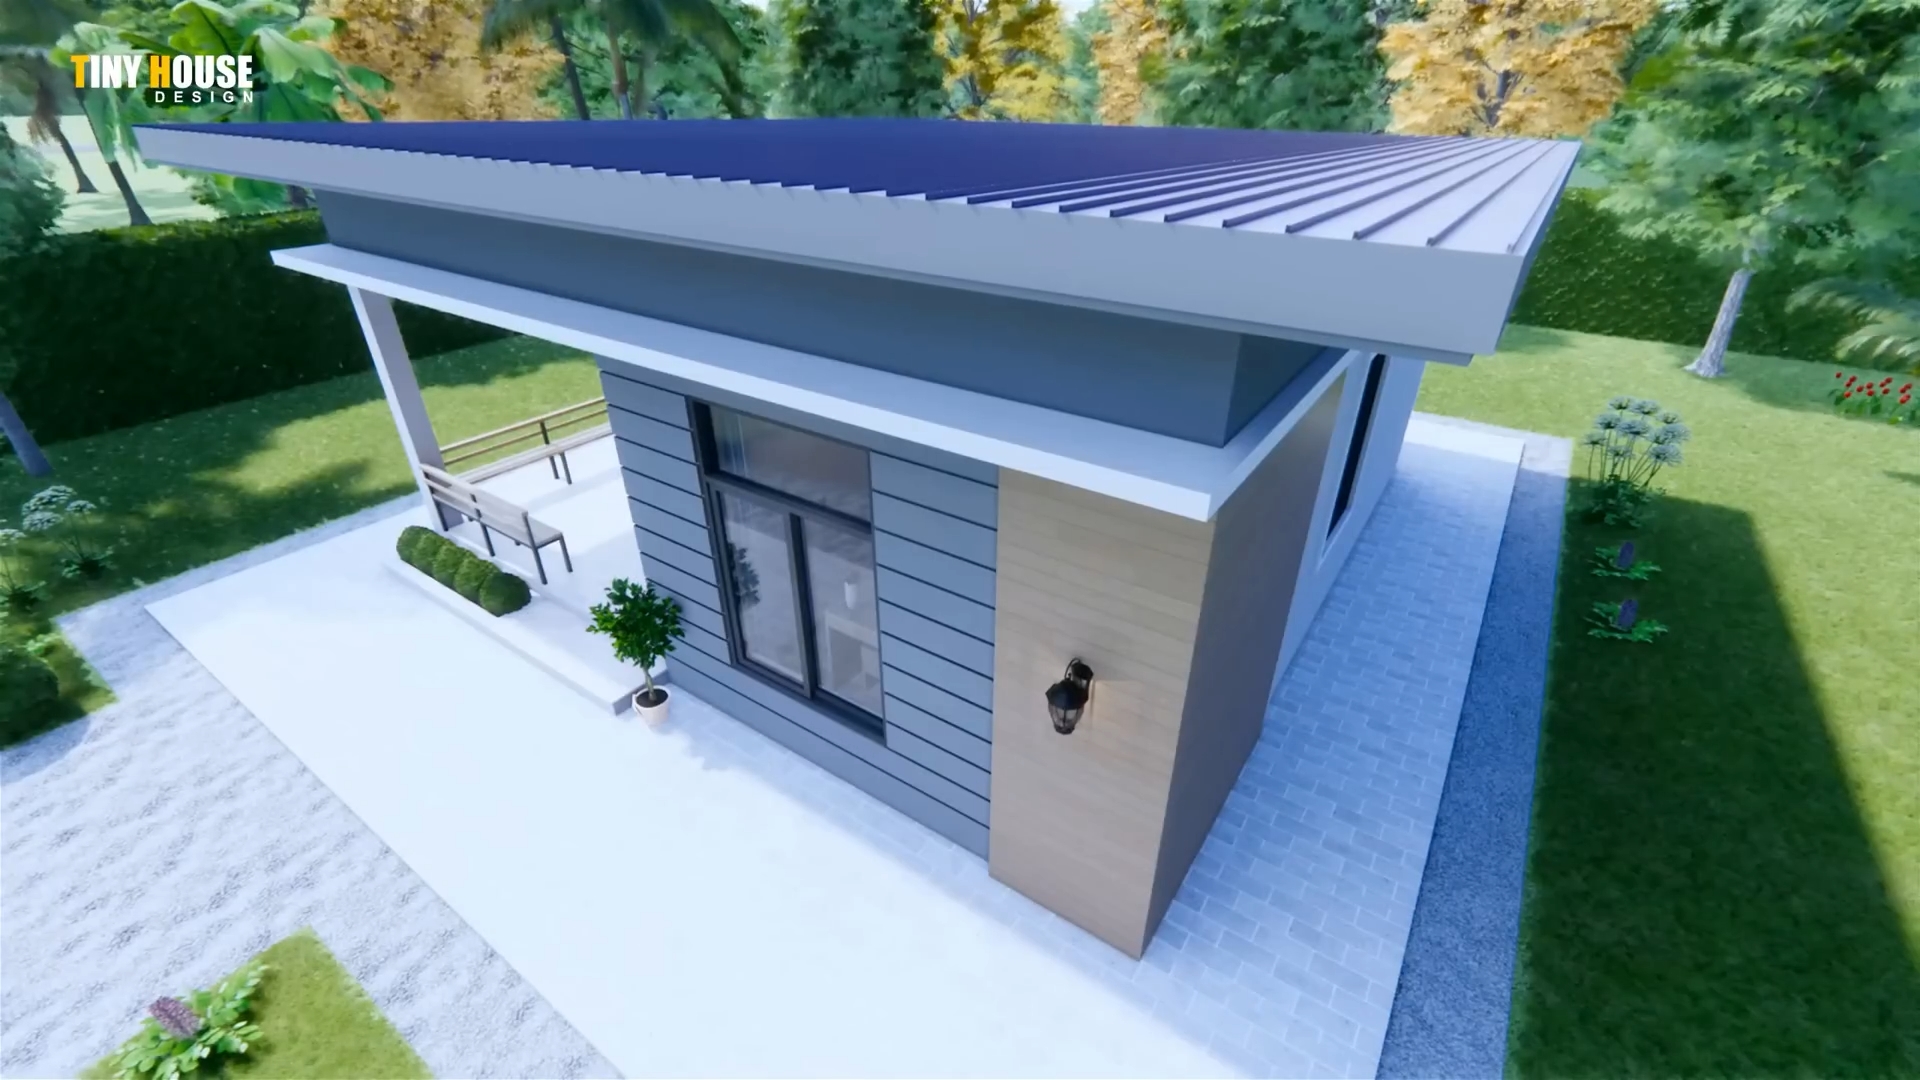 Beautiful Small House 7 x7 m House Design 2 Bedrooms